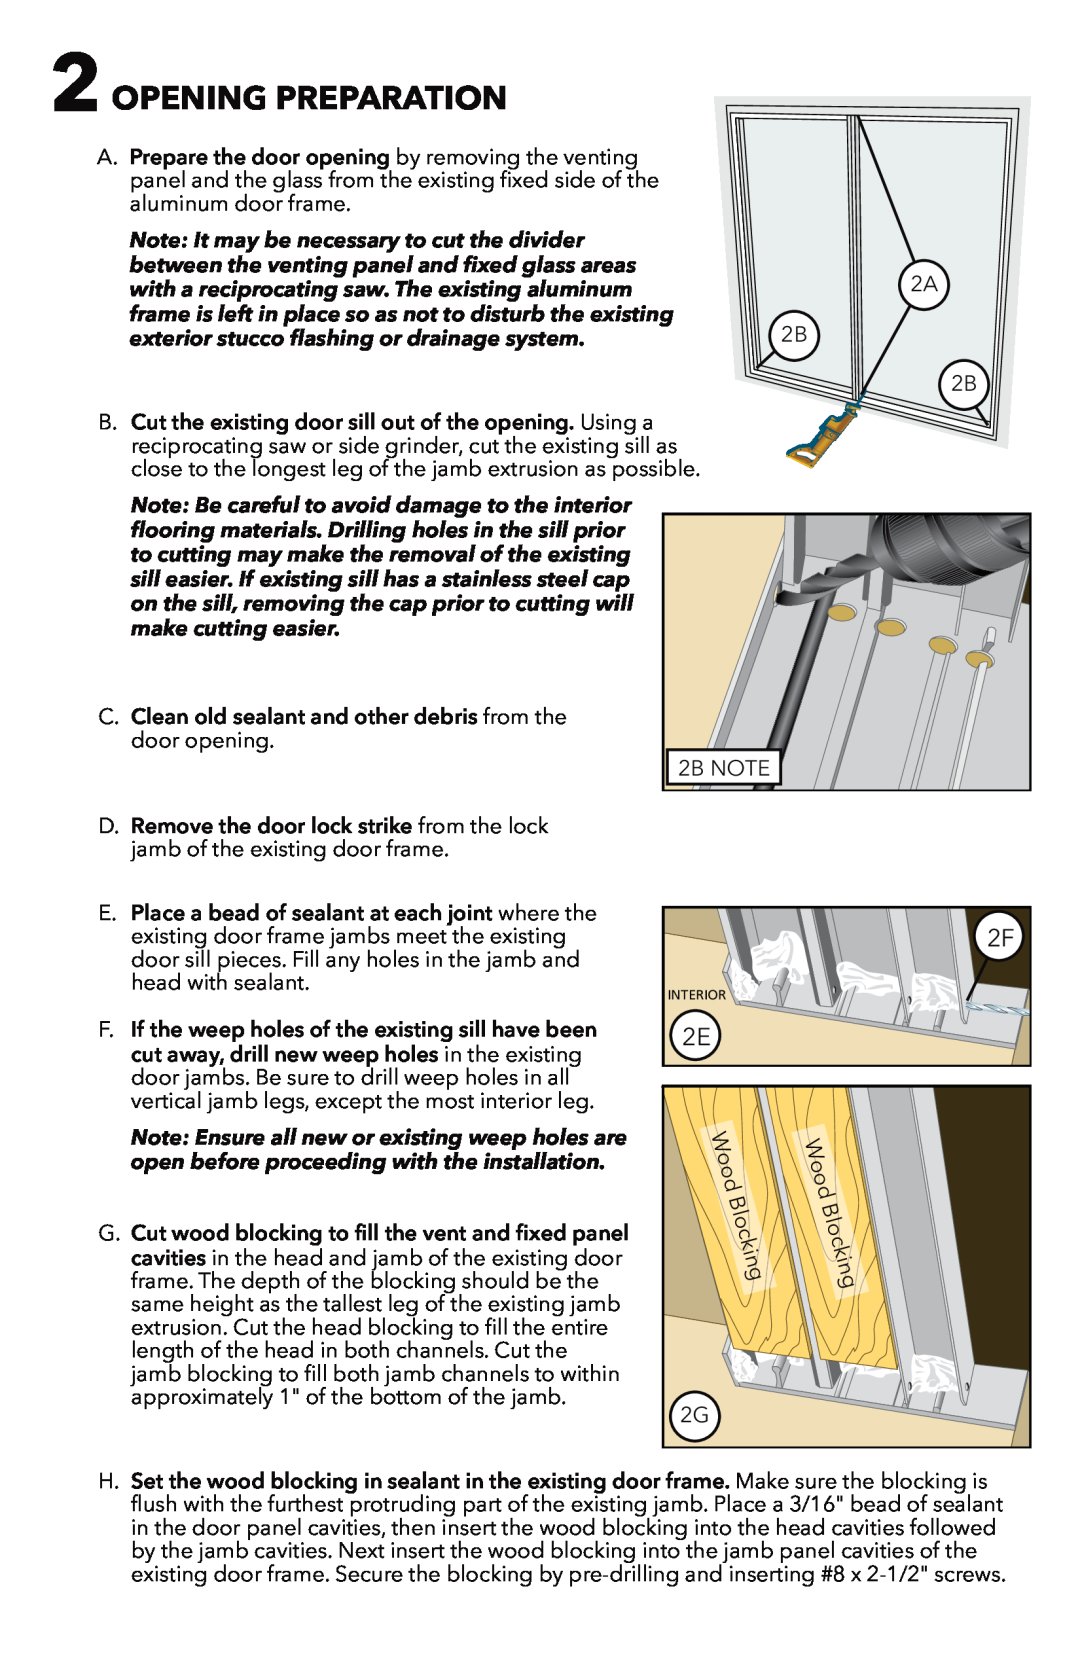 Pella 81CM0100 installation instructions Opening Preparation, Note It may be necessary to cut the divider, Wood, Blocking 